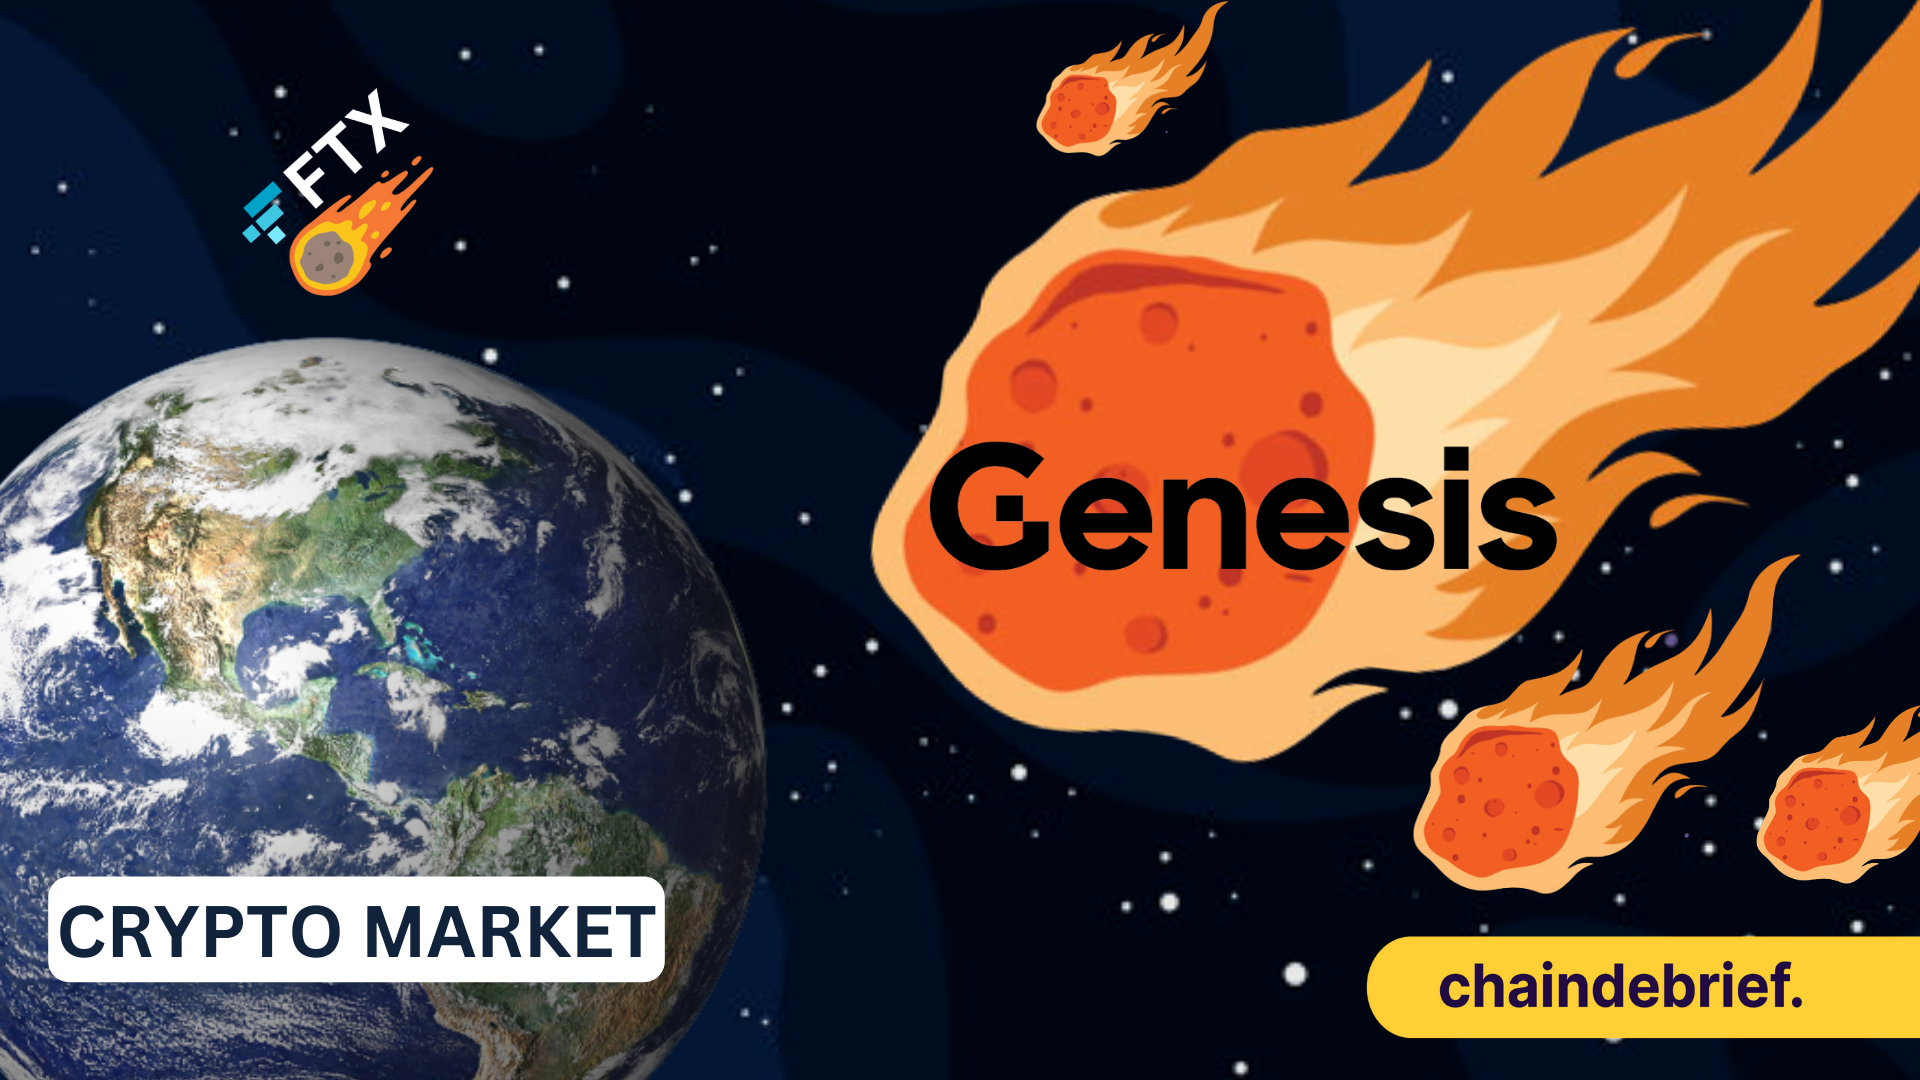 If You Thought FTX’s Fall Is Huge, Genesis Crashing Would Cripple Crypto